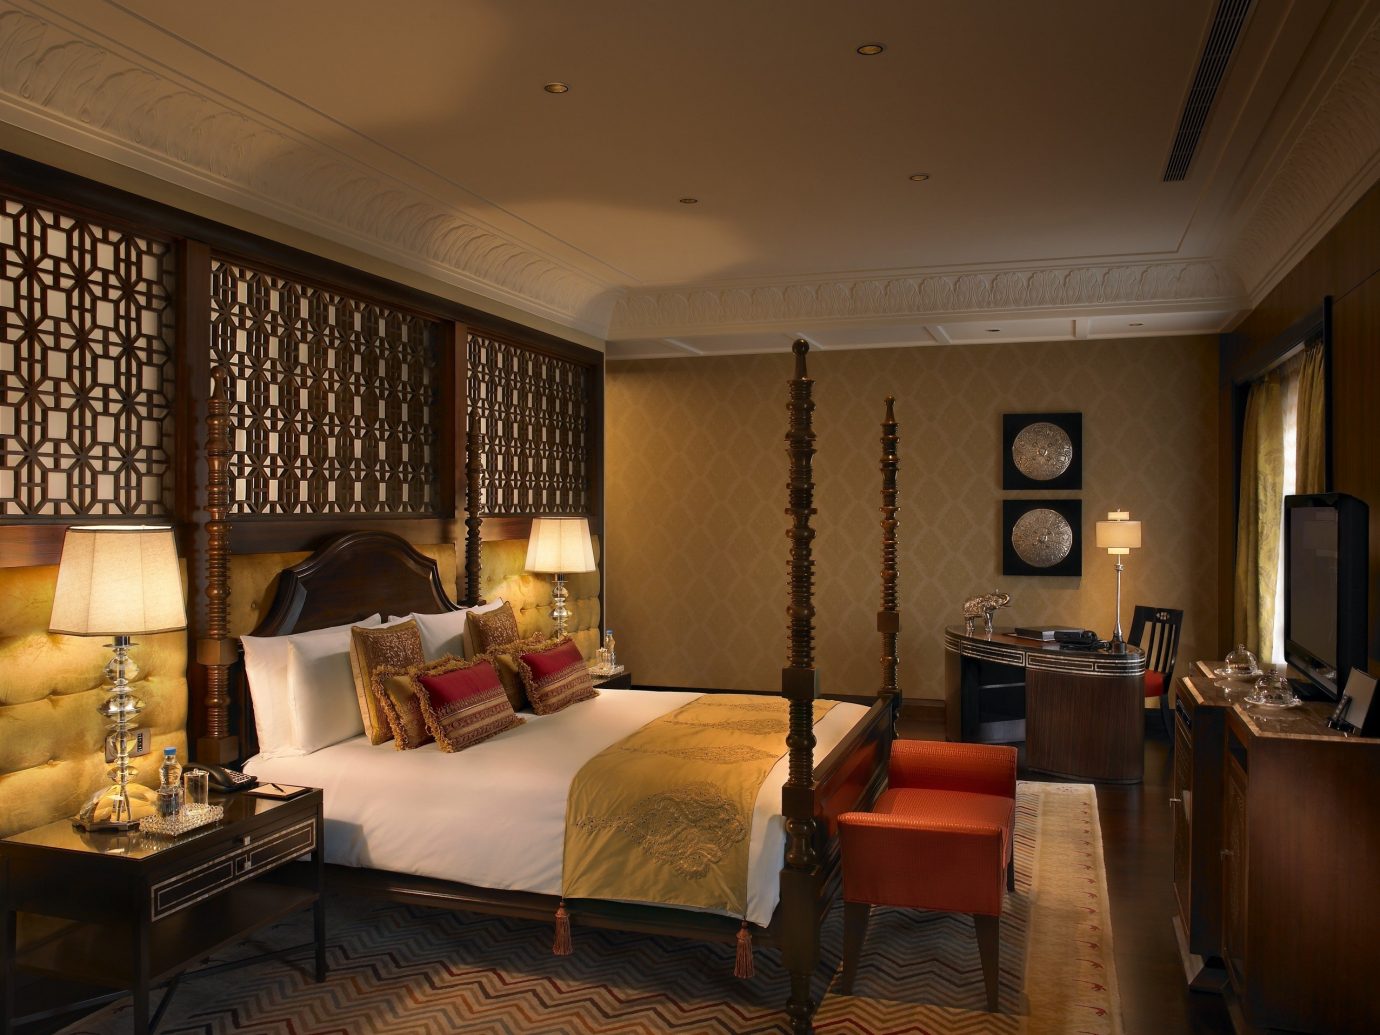 8 Most Expensive Hotel Suites in India